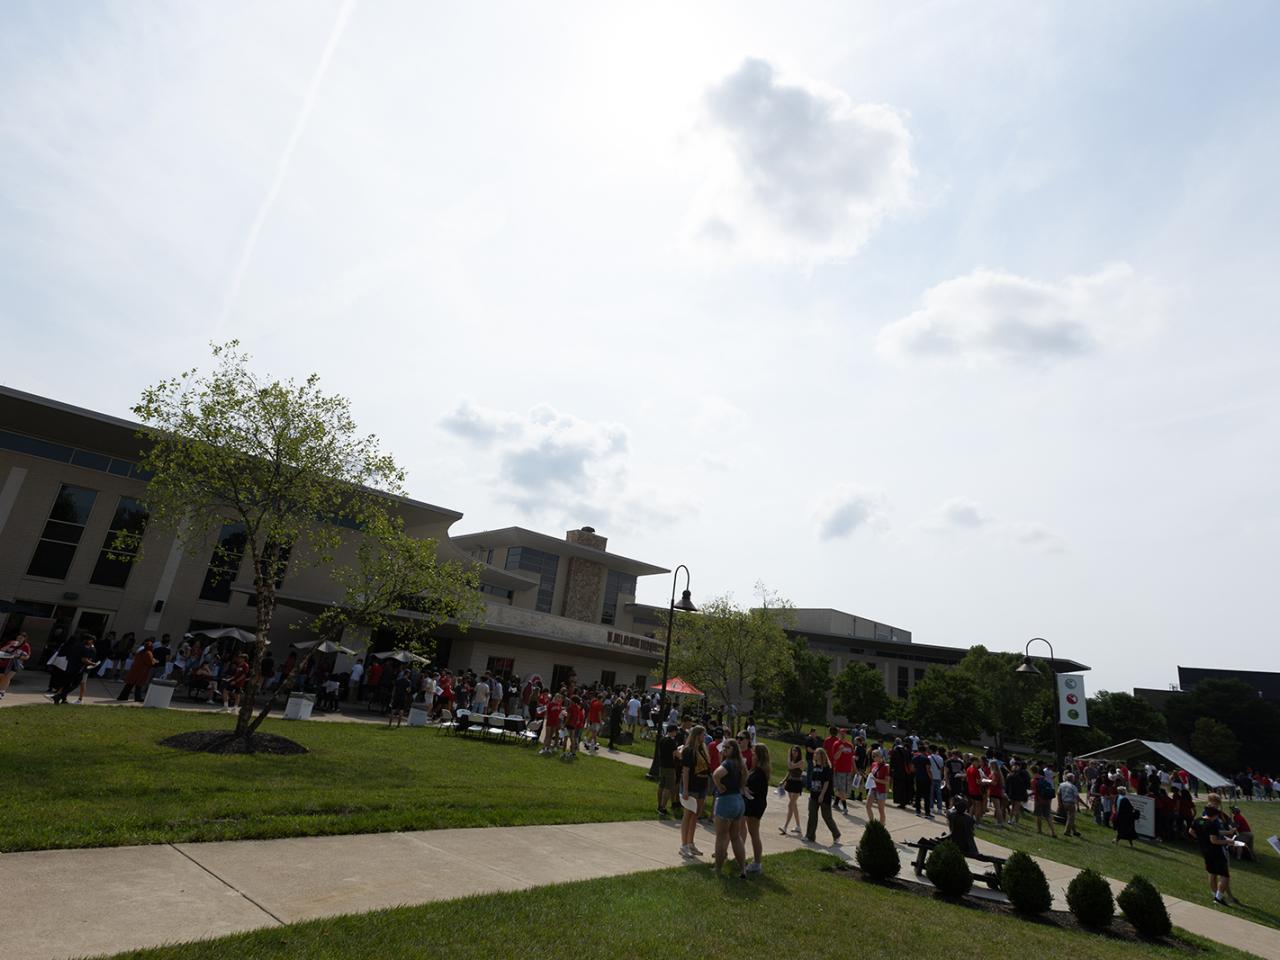 Students gather on the campus lawn outside the Warner Center for lunch following Convocation.